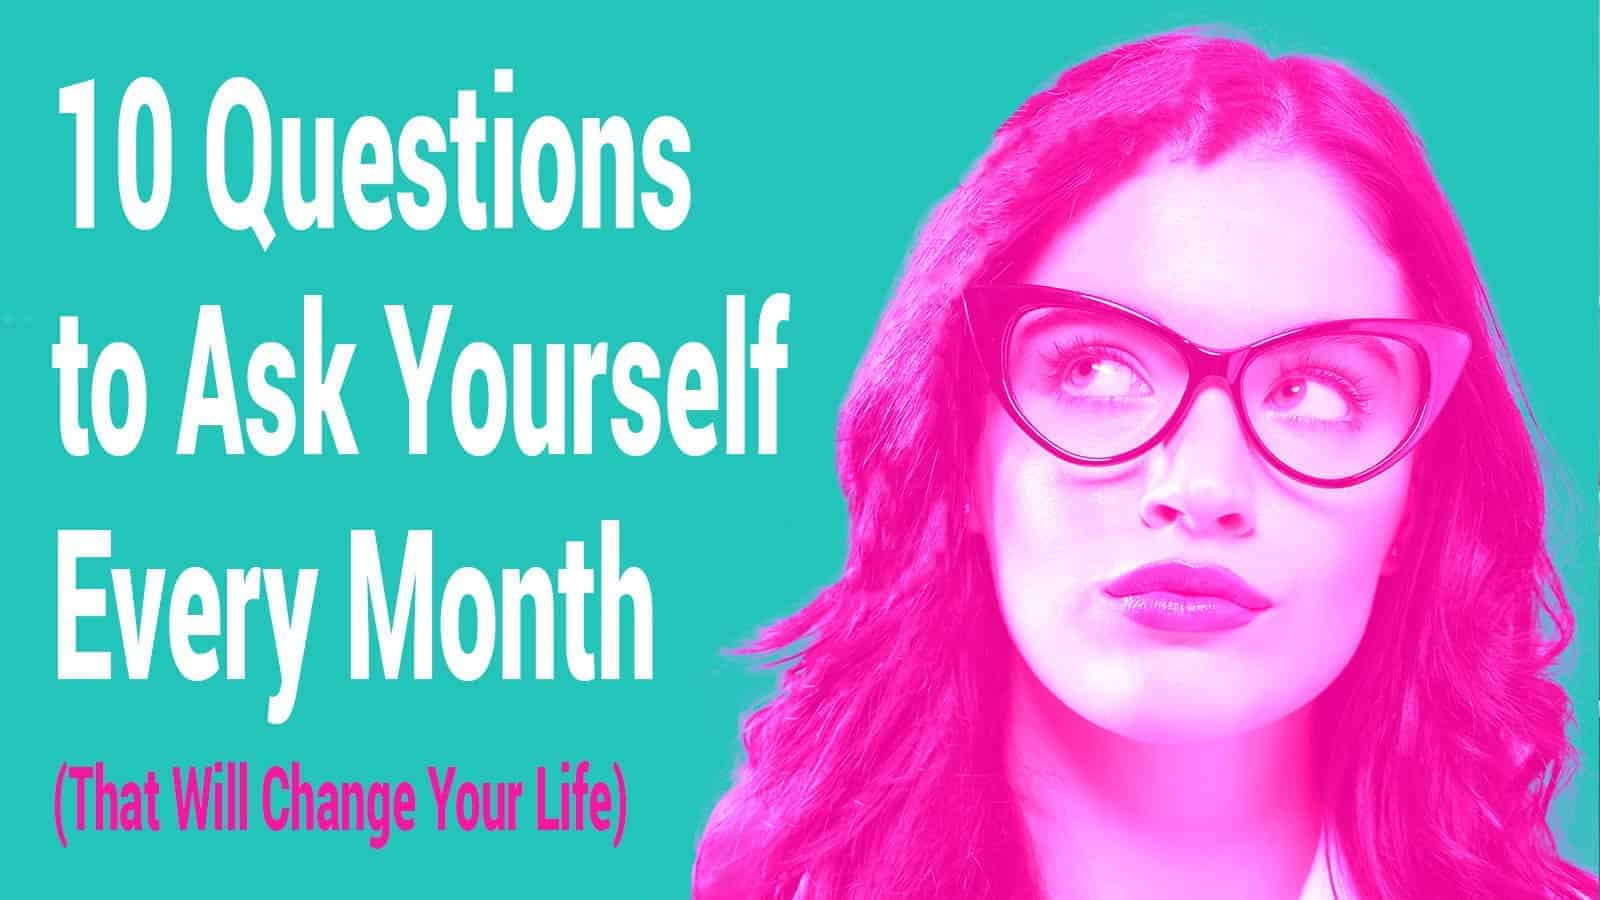 10 Questions to Ask Yourself Every Month (That Will Change Your Life)